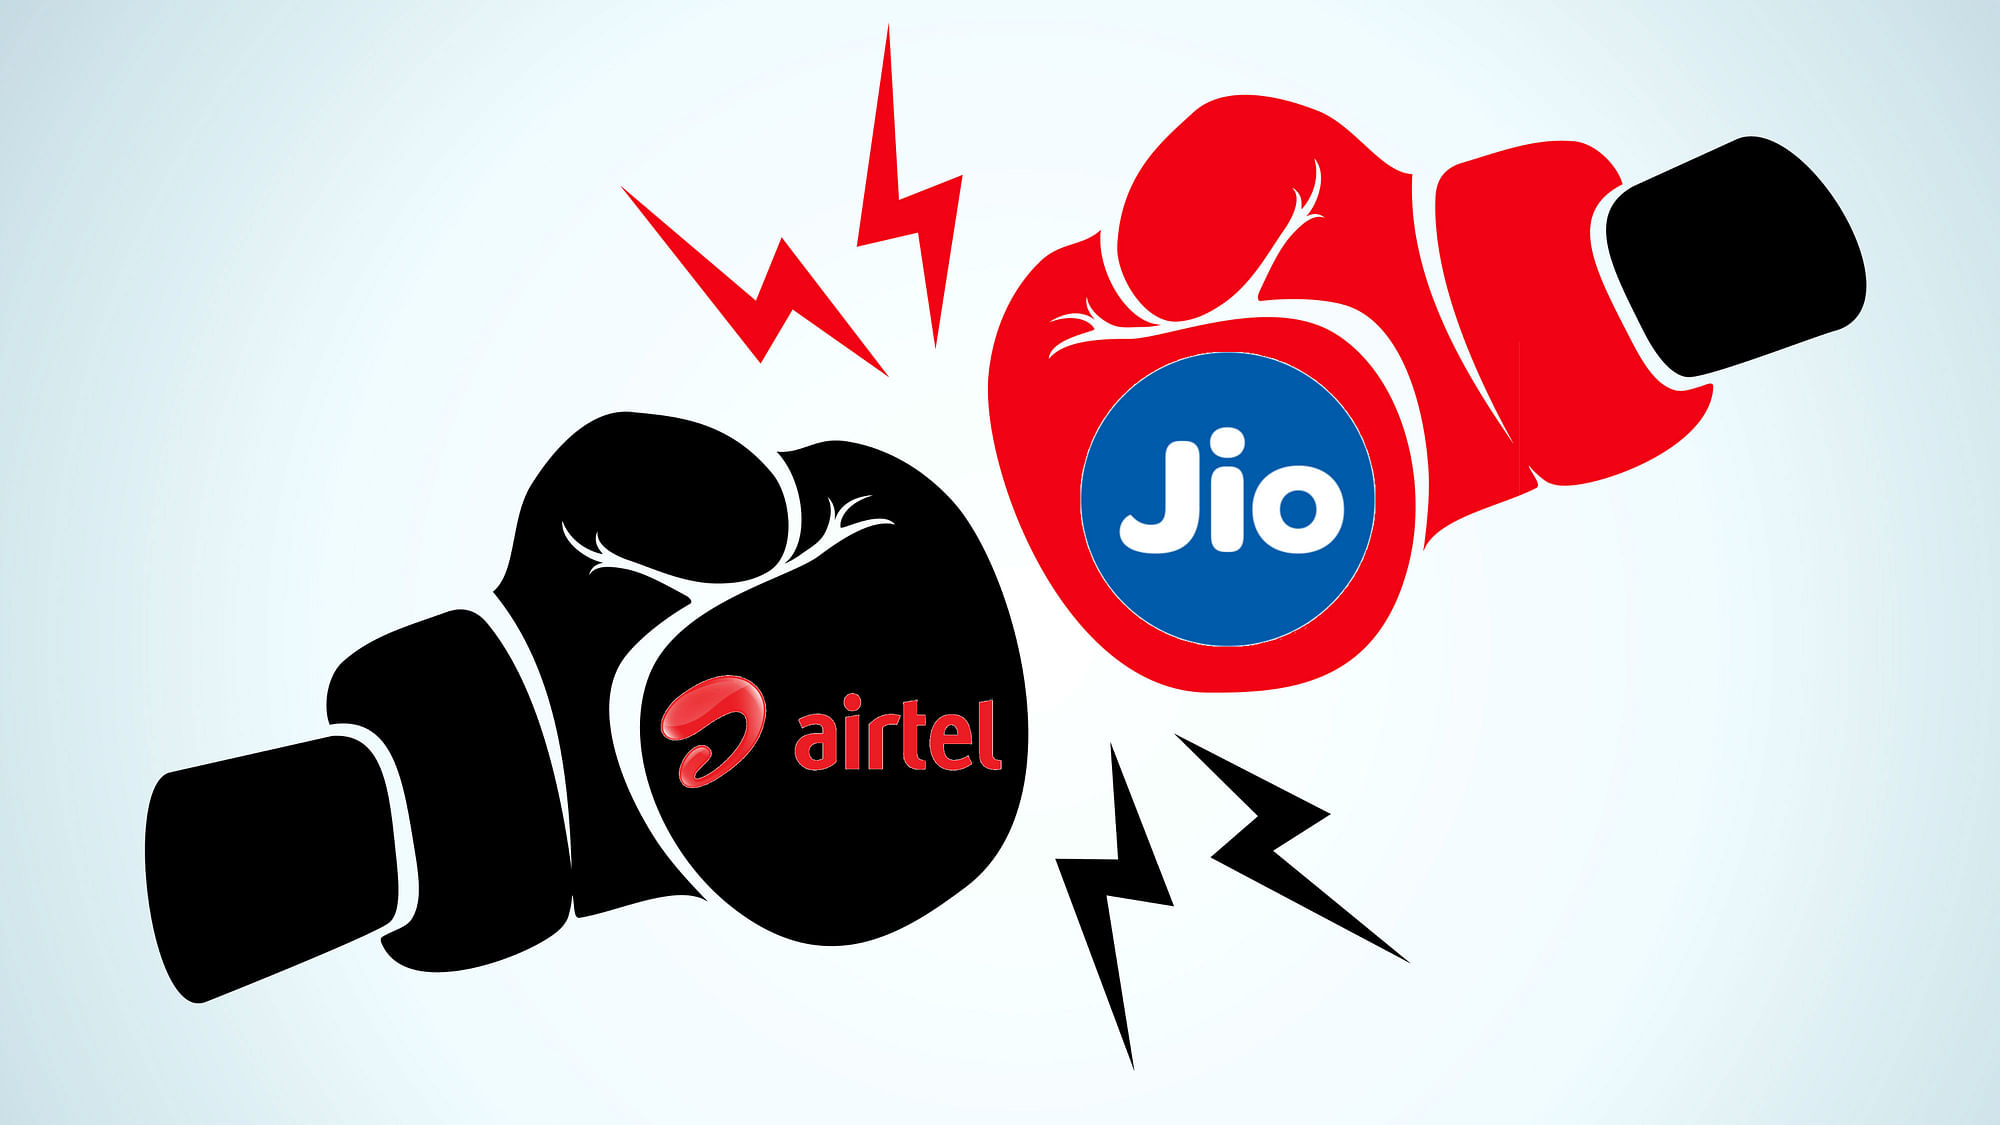 The battle between Airtel and Reliance Jio continues to go on. (Photo: <b>The Quint</b>)